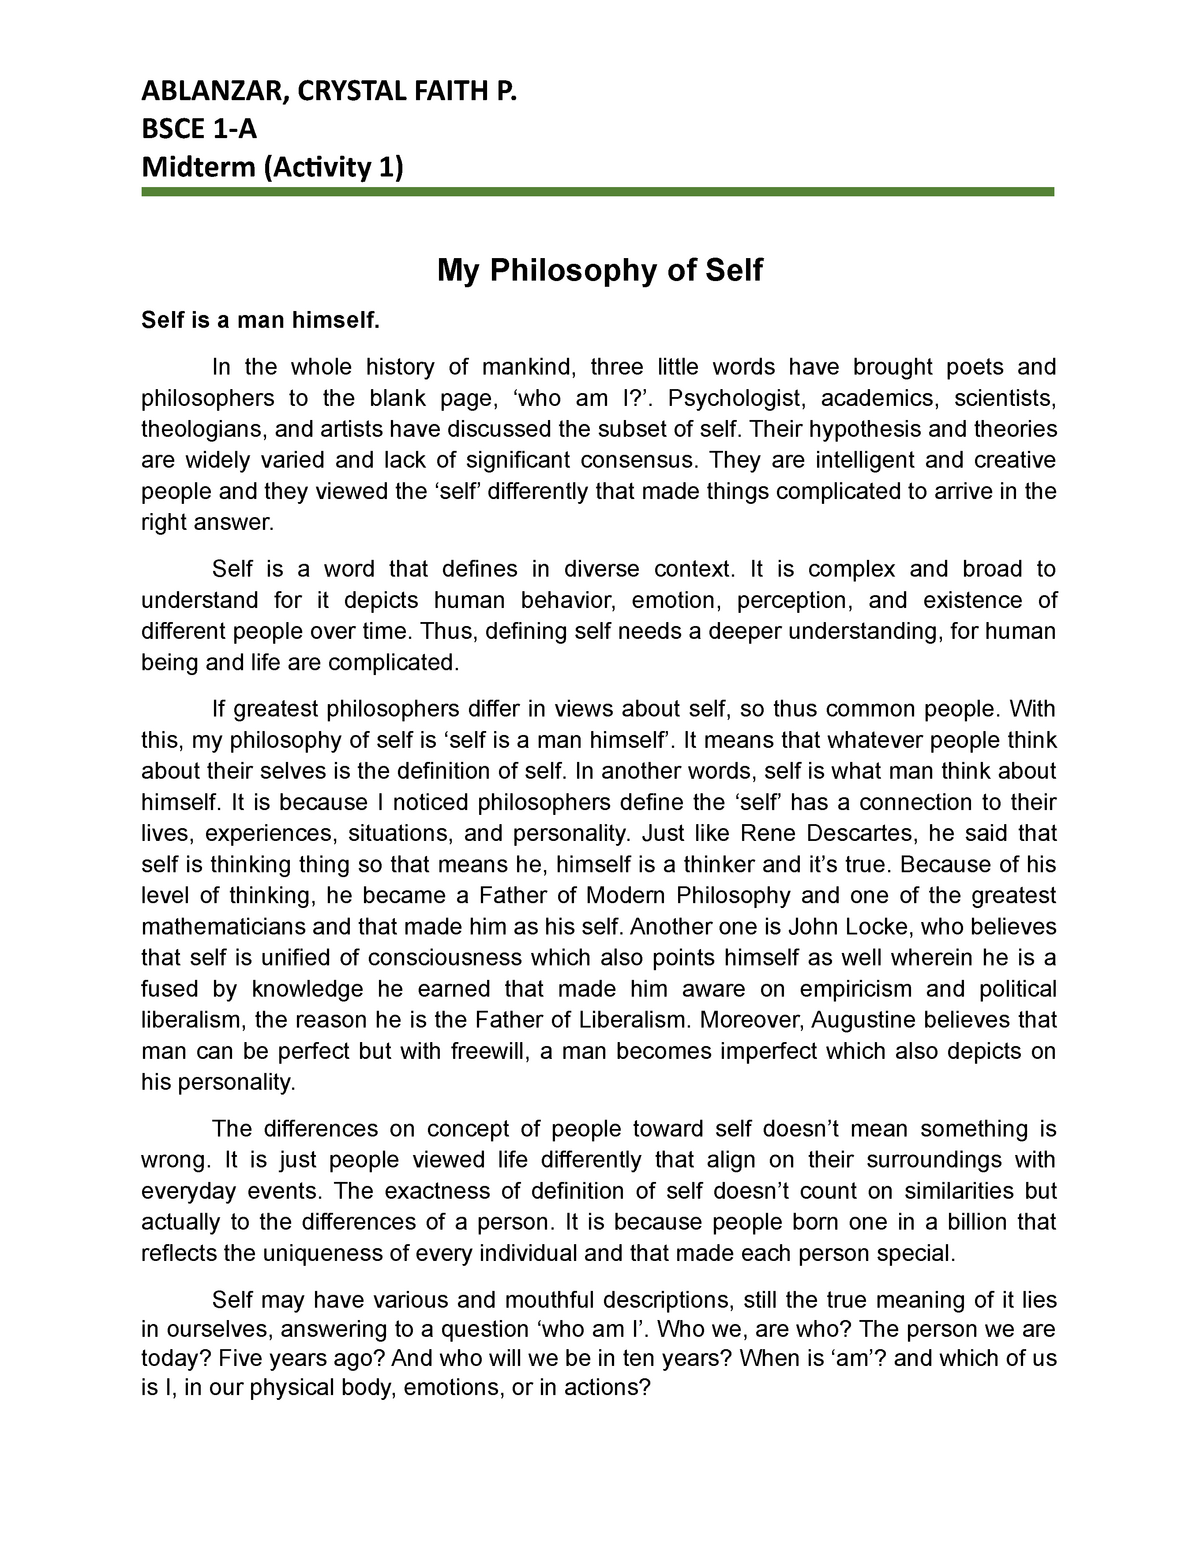 write an essay about your own philosophy in life